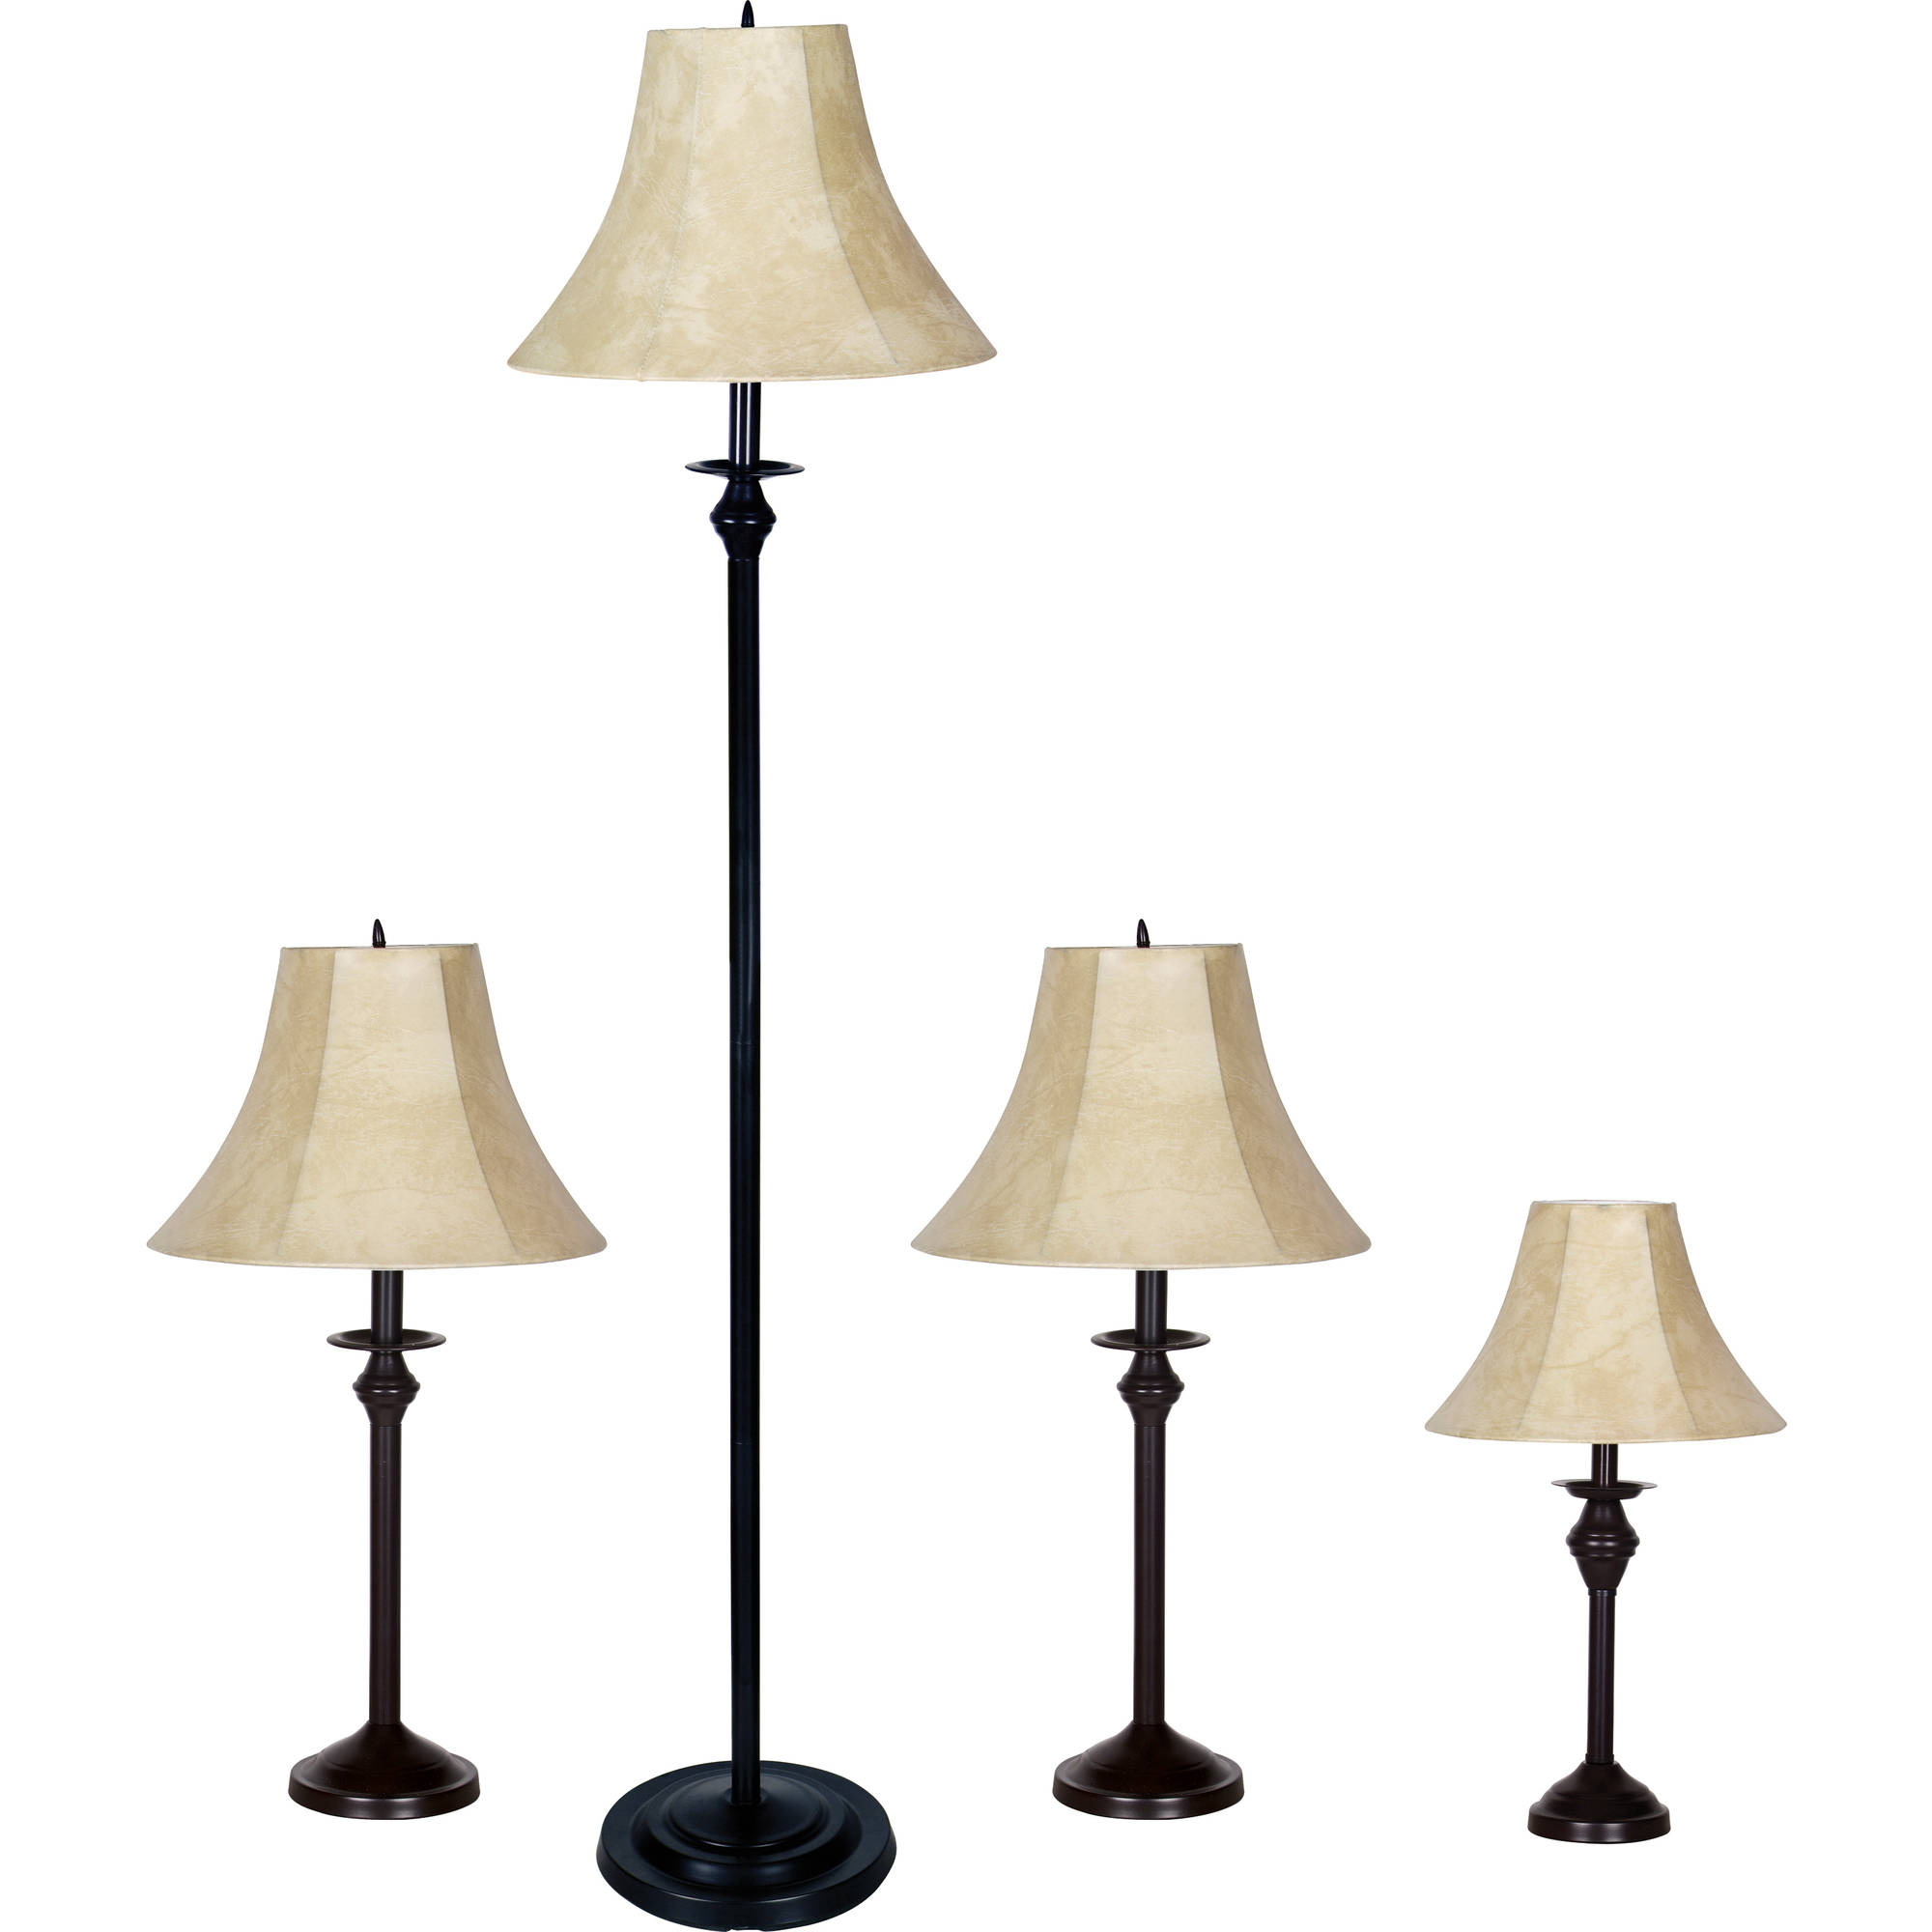 Better Homes & Gardens Traditional 4-Piece Table and Floor Lamp Set, Bronze - image 1 of 3